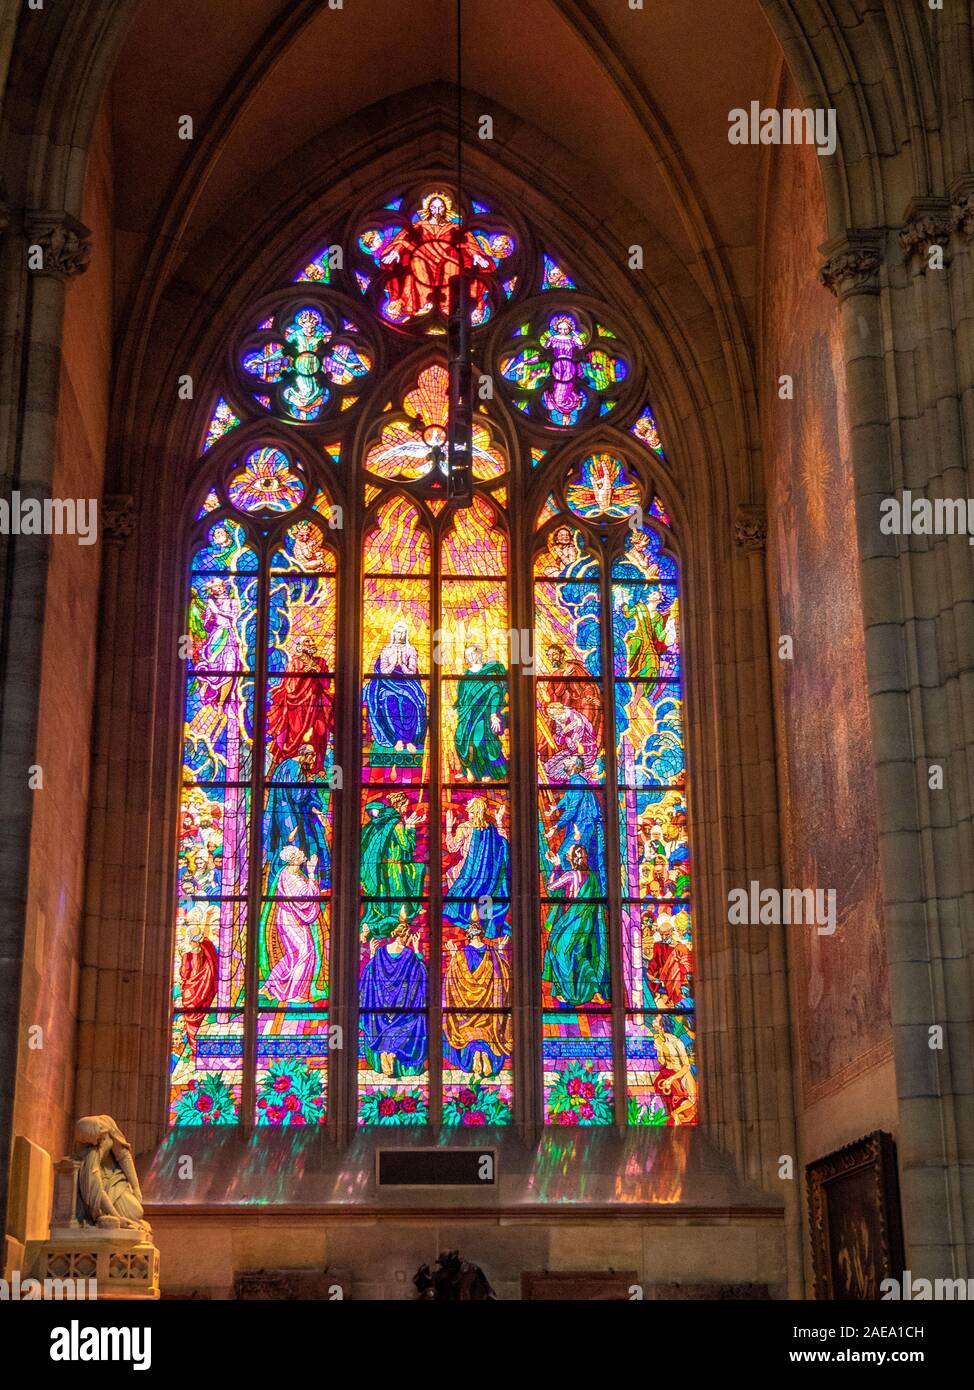 Detail of stain glass window in Gothic St Vitus Cathedral Prague Castle Complex Prague Czech Republic. Stock Photo